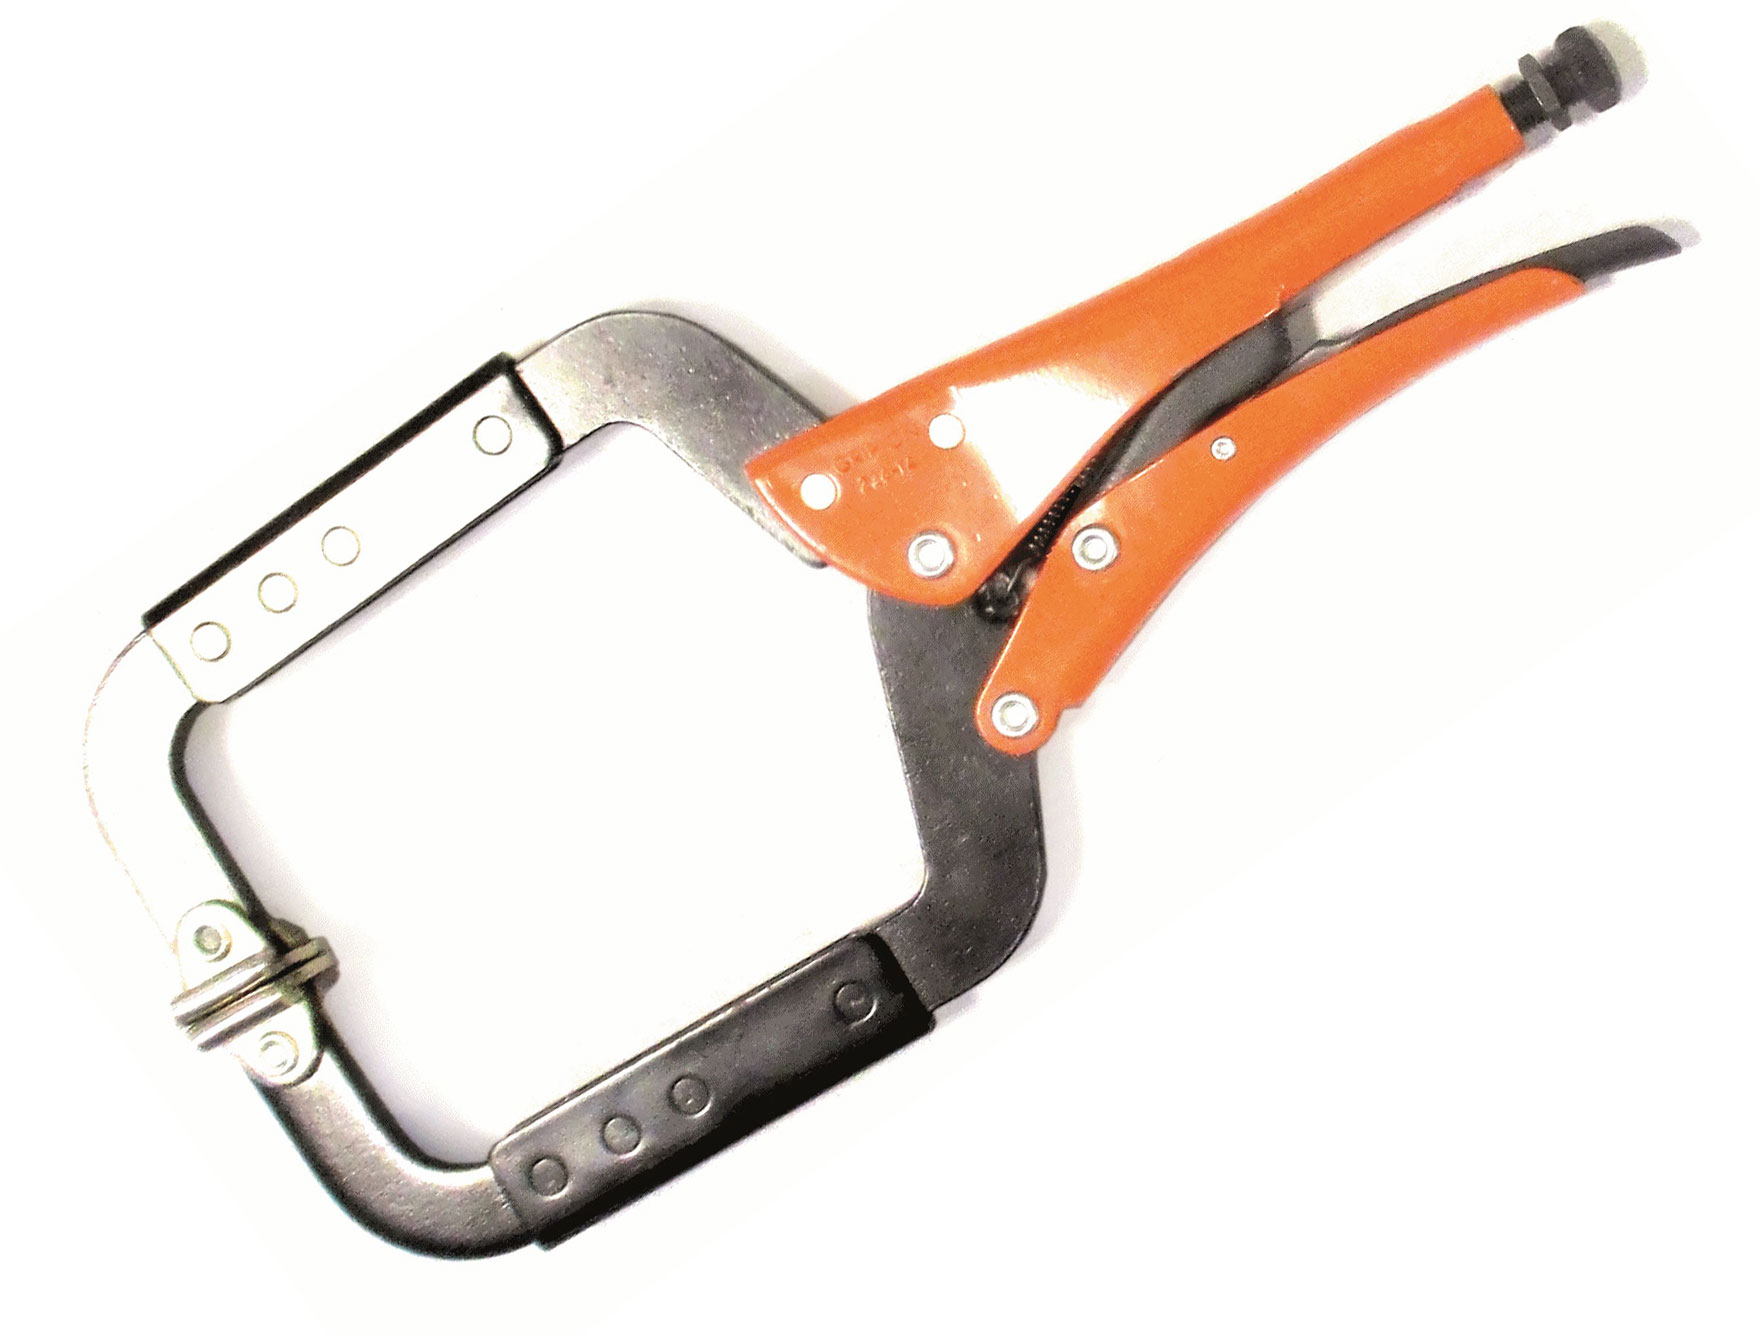 GRIP-ON C-Clamp with swivel shoe